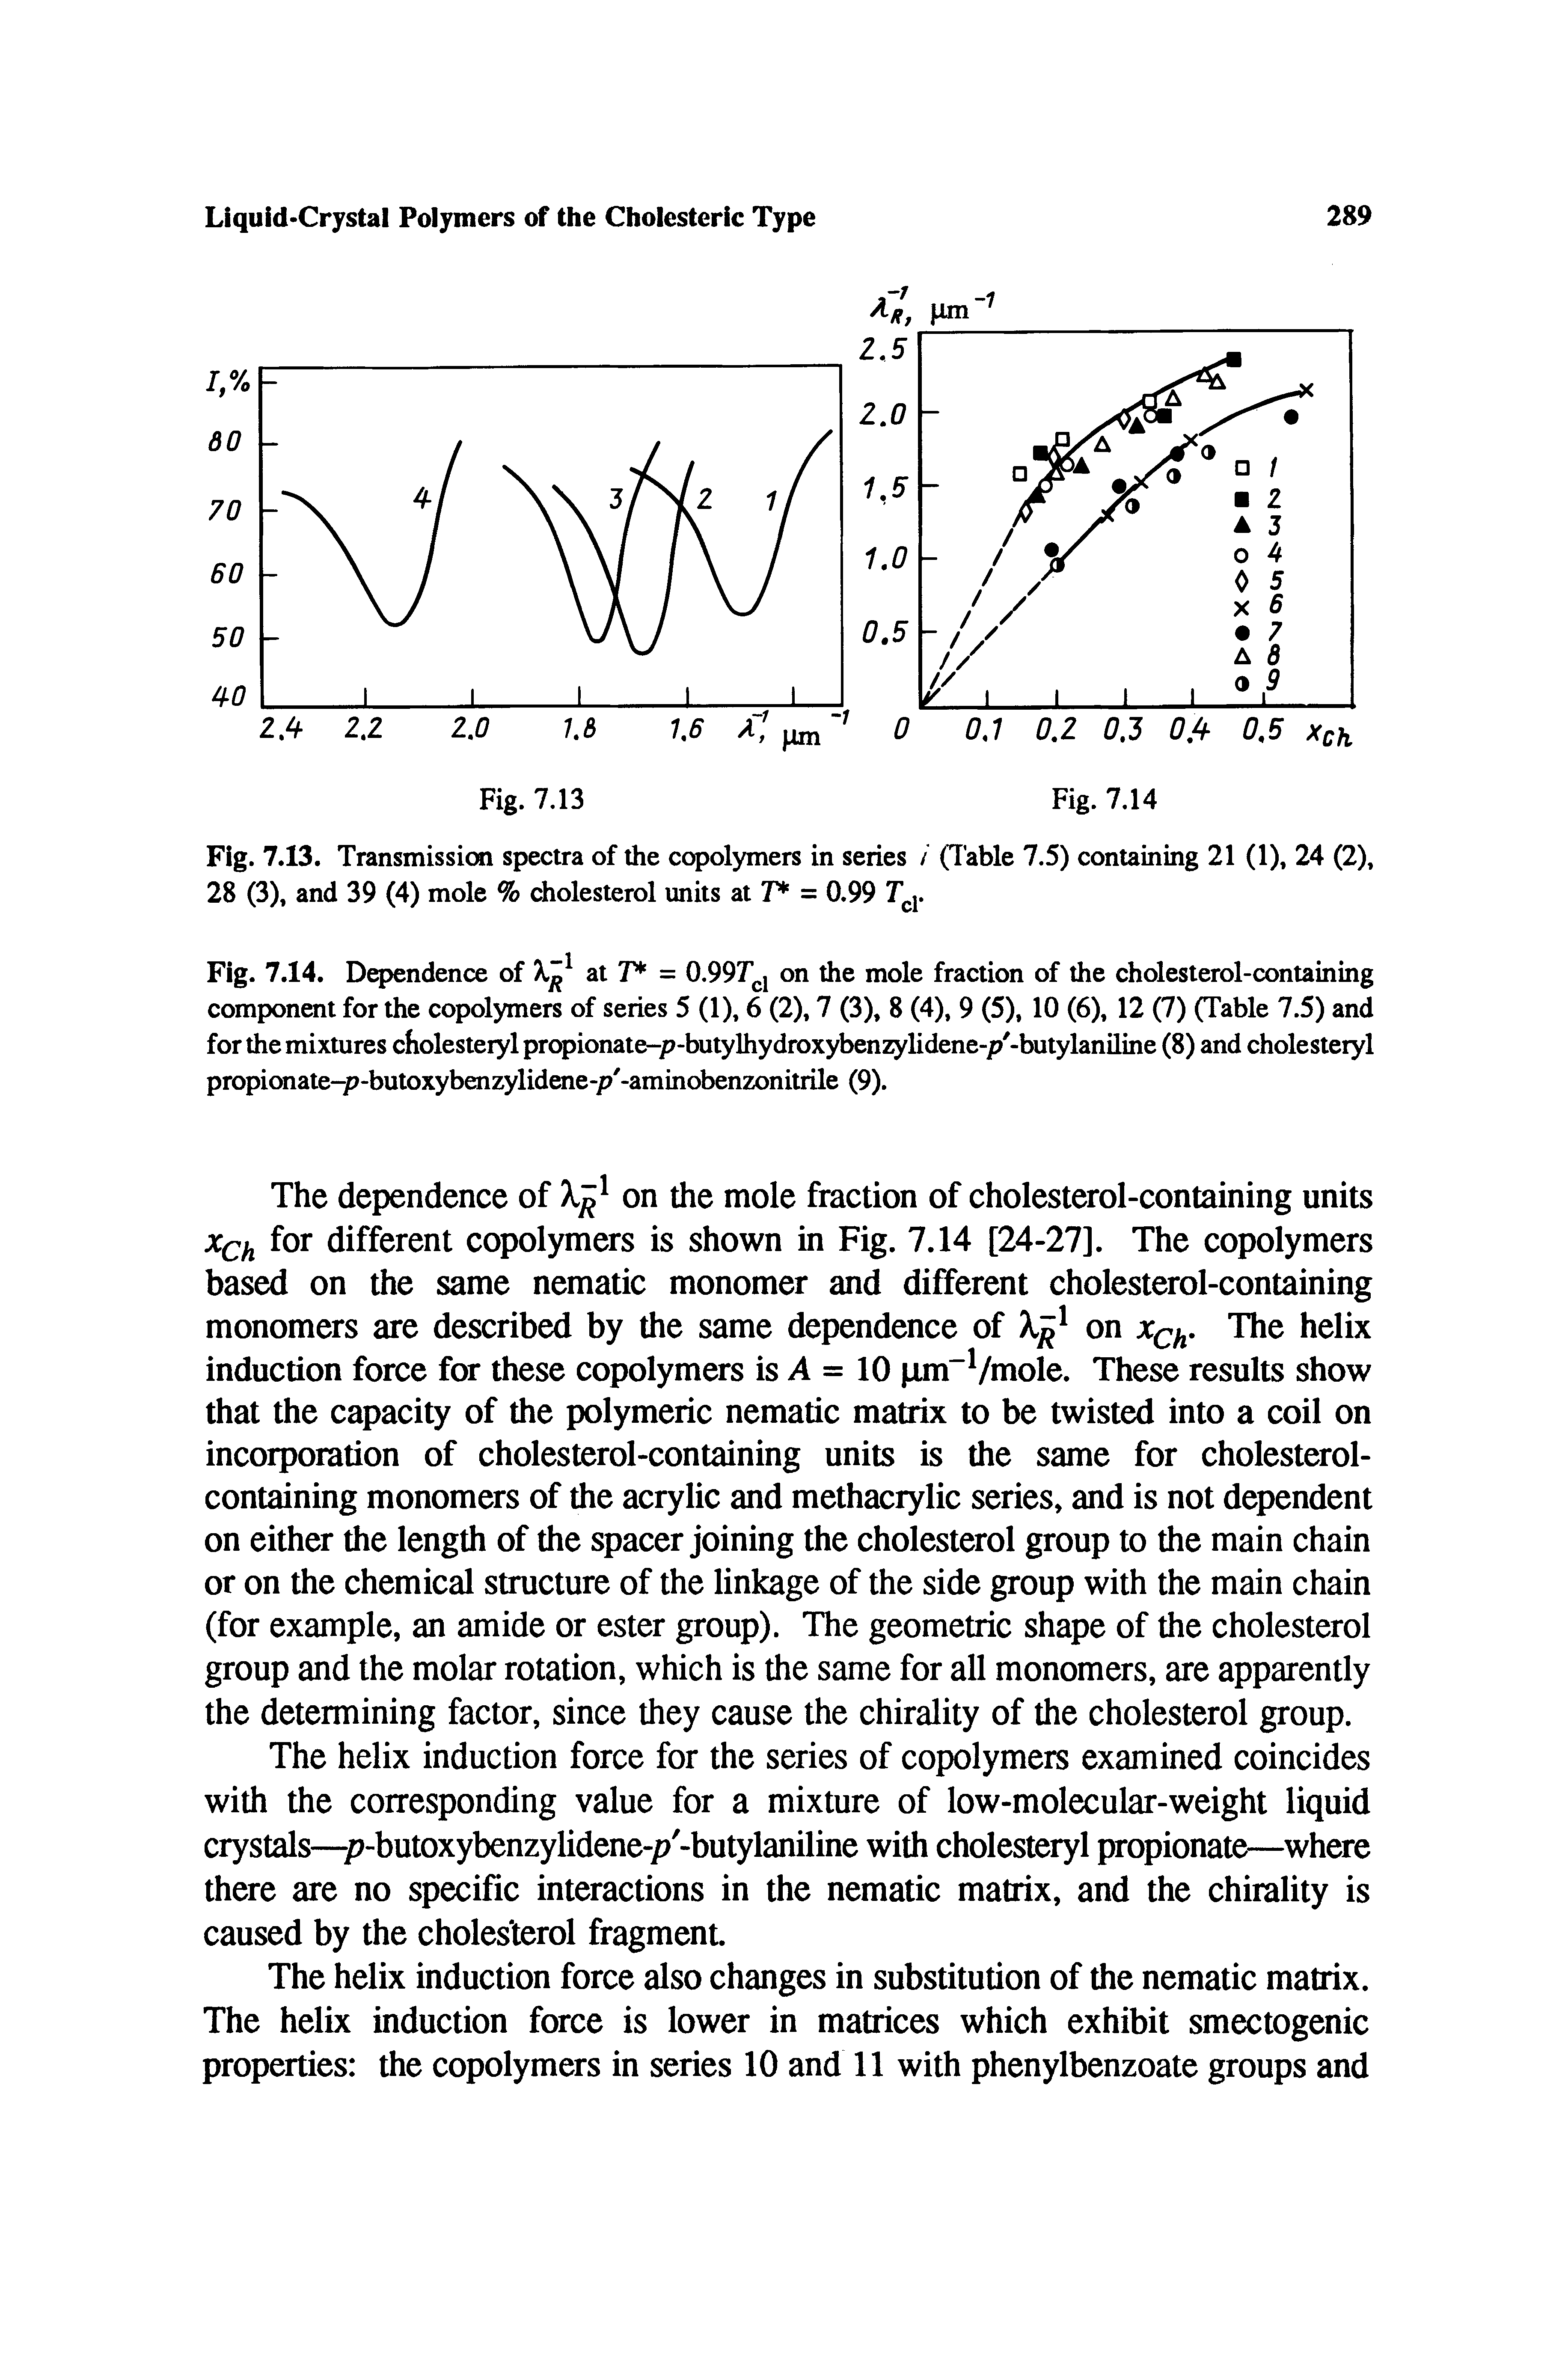 Fig. 7.14. Dependence of at T = 0.99r j on the mole fraction of the cholesterol-containing component for the copolymers of series 5 (1), 6 (2), 7 (3), 8 (4), 9 (5), 10 (6), 12 (7) (Table 7.5) and for the mixtures cfiolesterylpropionate-p-butylhydroxyben lidene-p -butylaniline (8) and cholesteryl propionate-p-butoxybenzylidene-p -aminobenzonitrile (9).